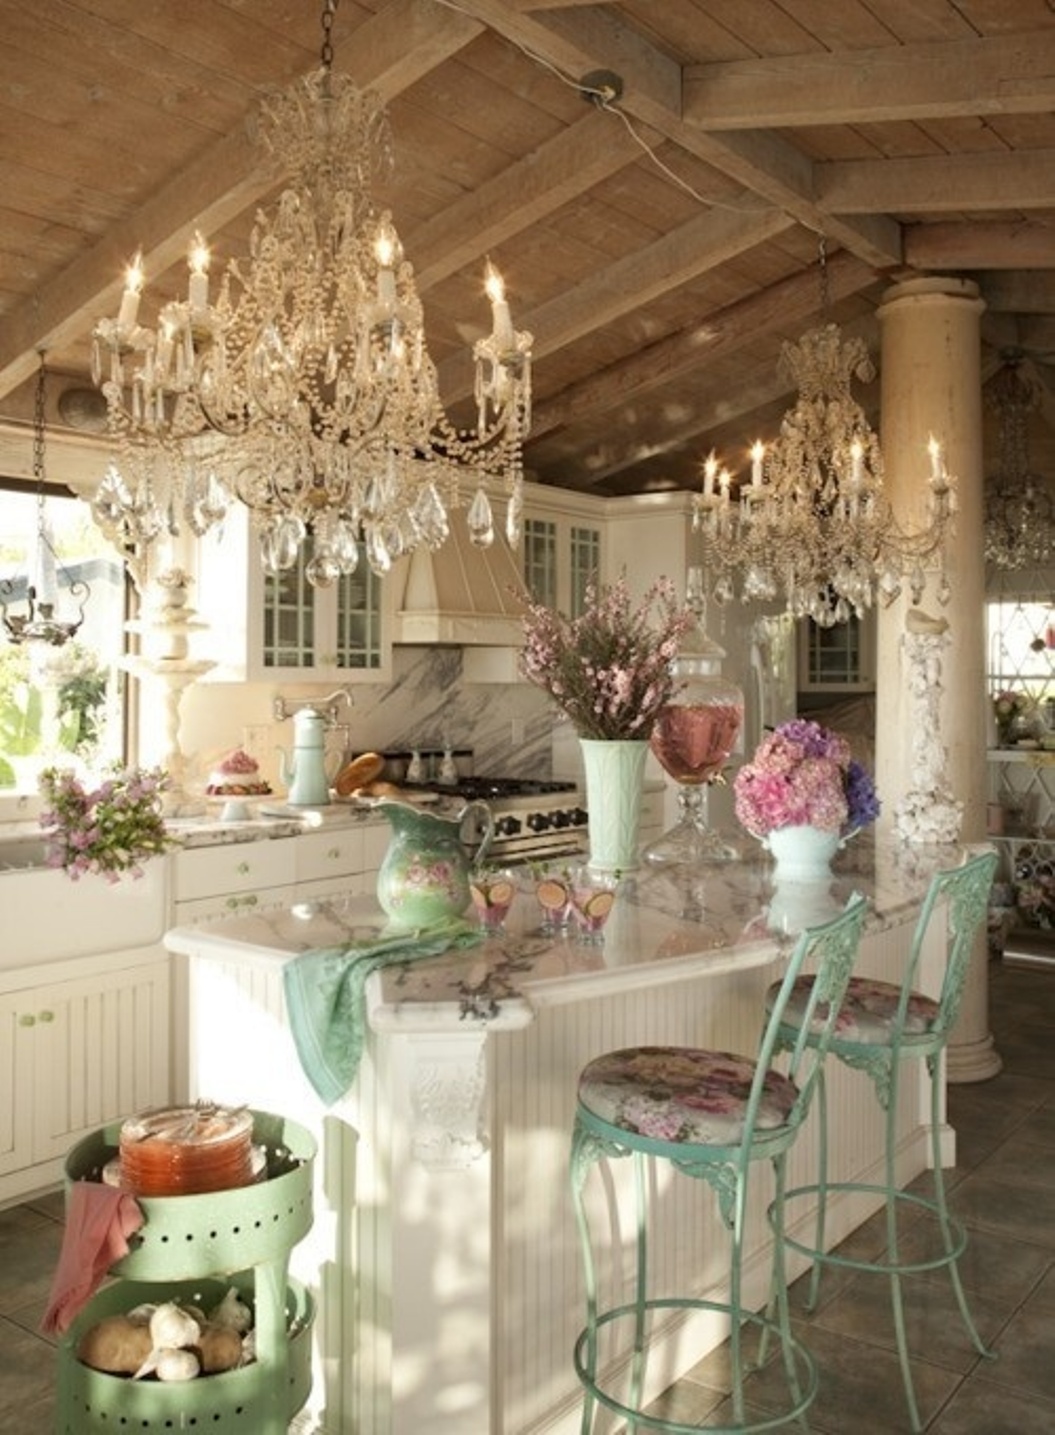 shabby-chic-kitchen-ideas-with-double-kitchen-chandelier-above-kitchen-island-with-seating-for-two-and-white-cabinets.